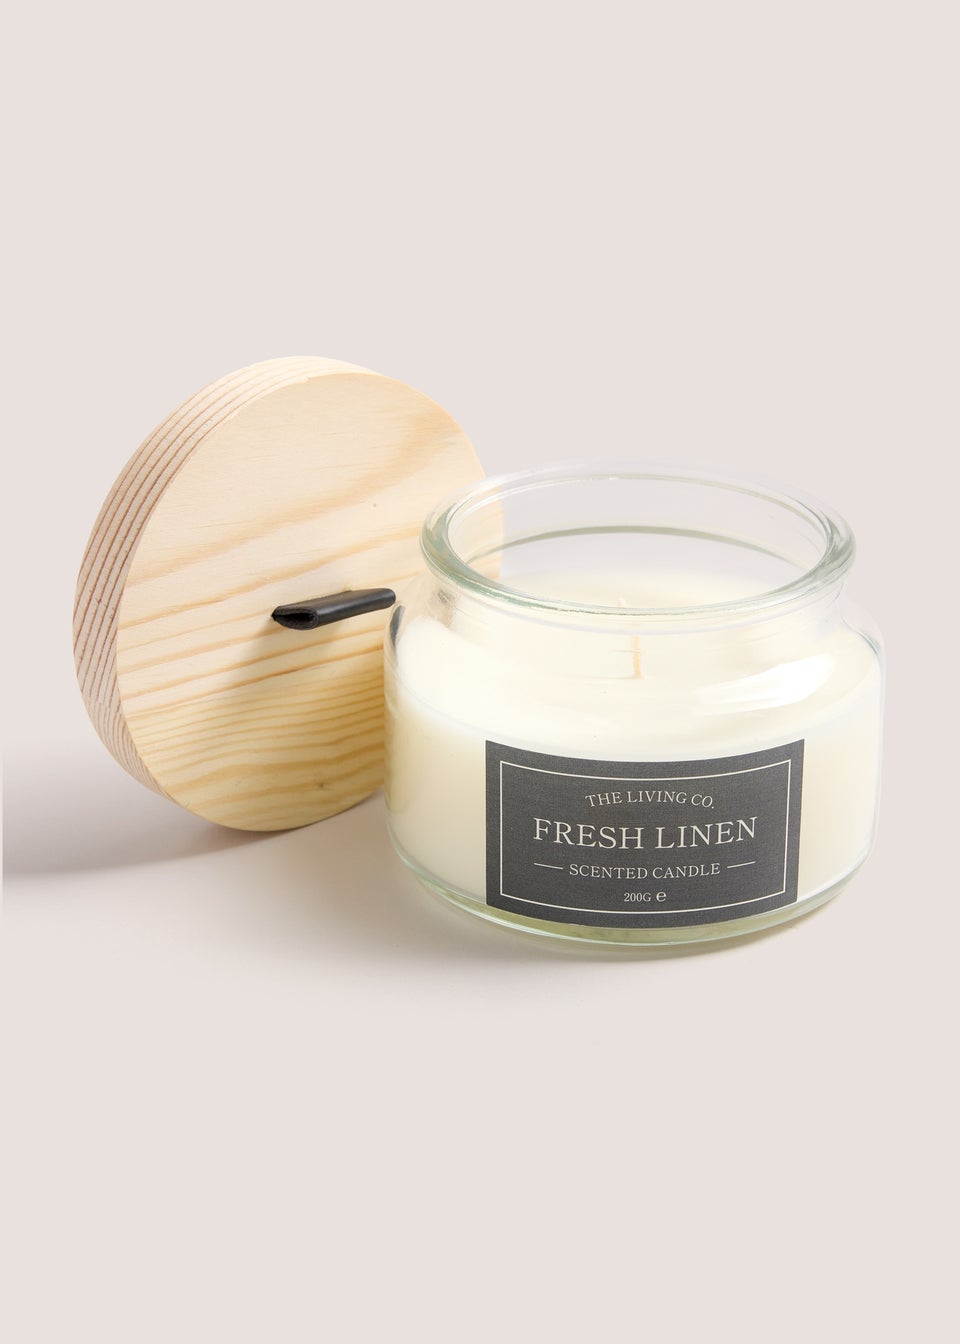 Fresh Linen Scented Candles (200g)